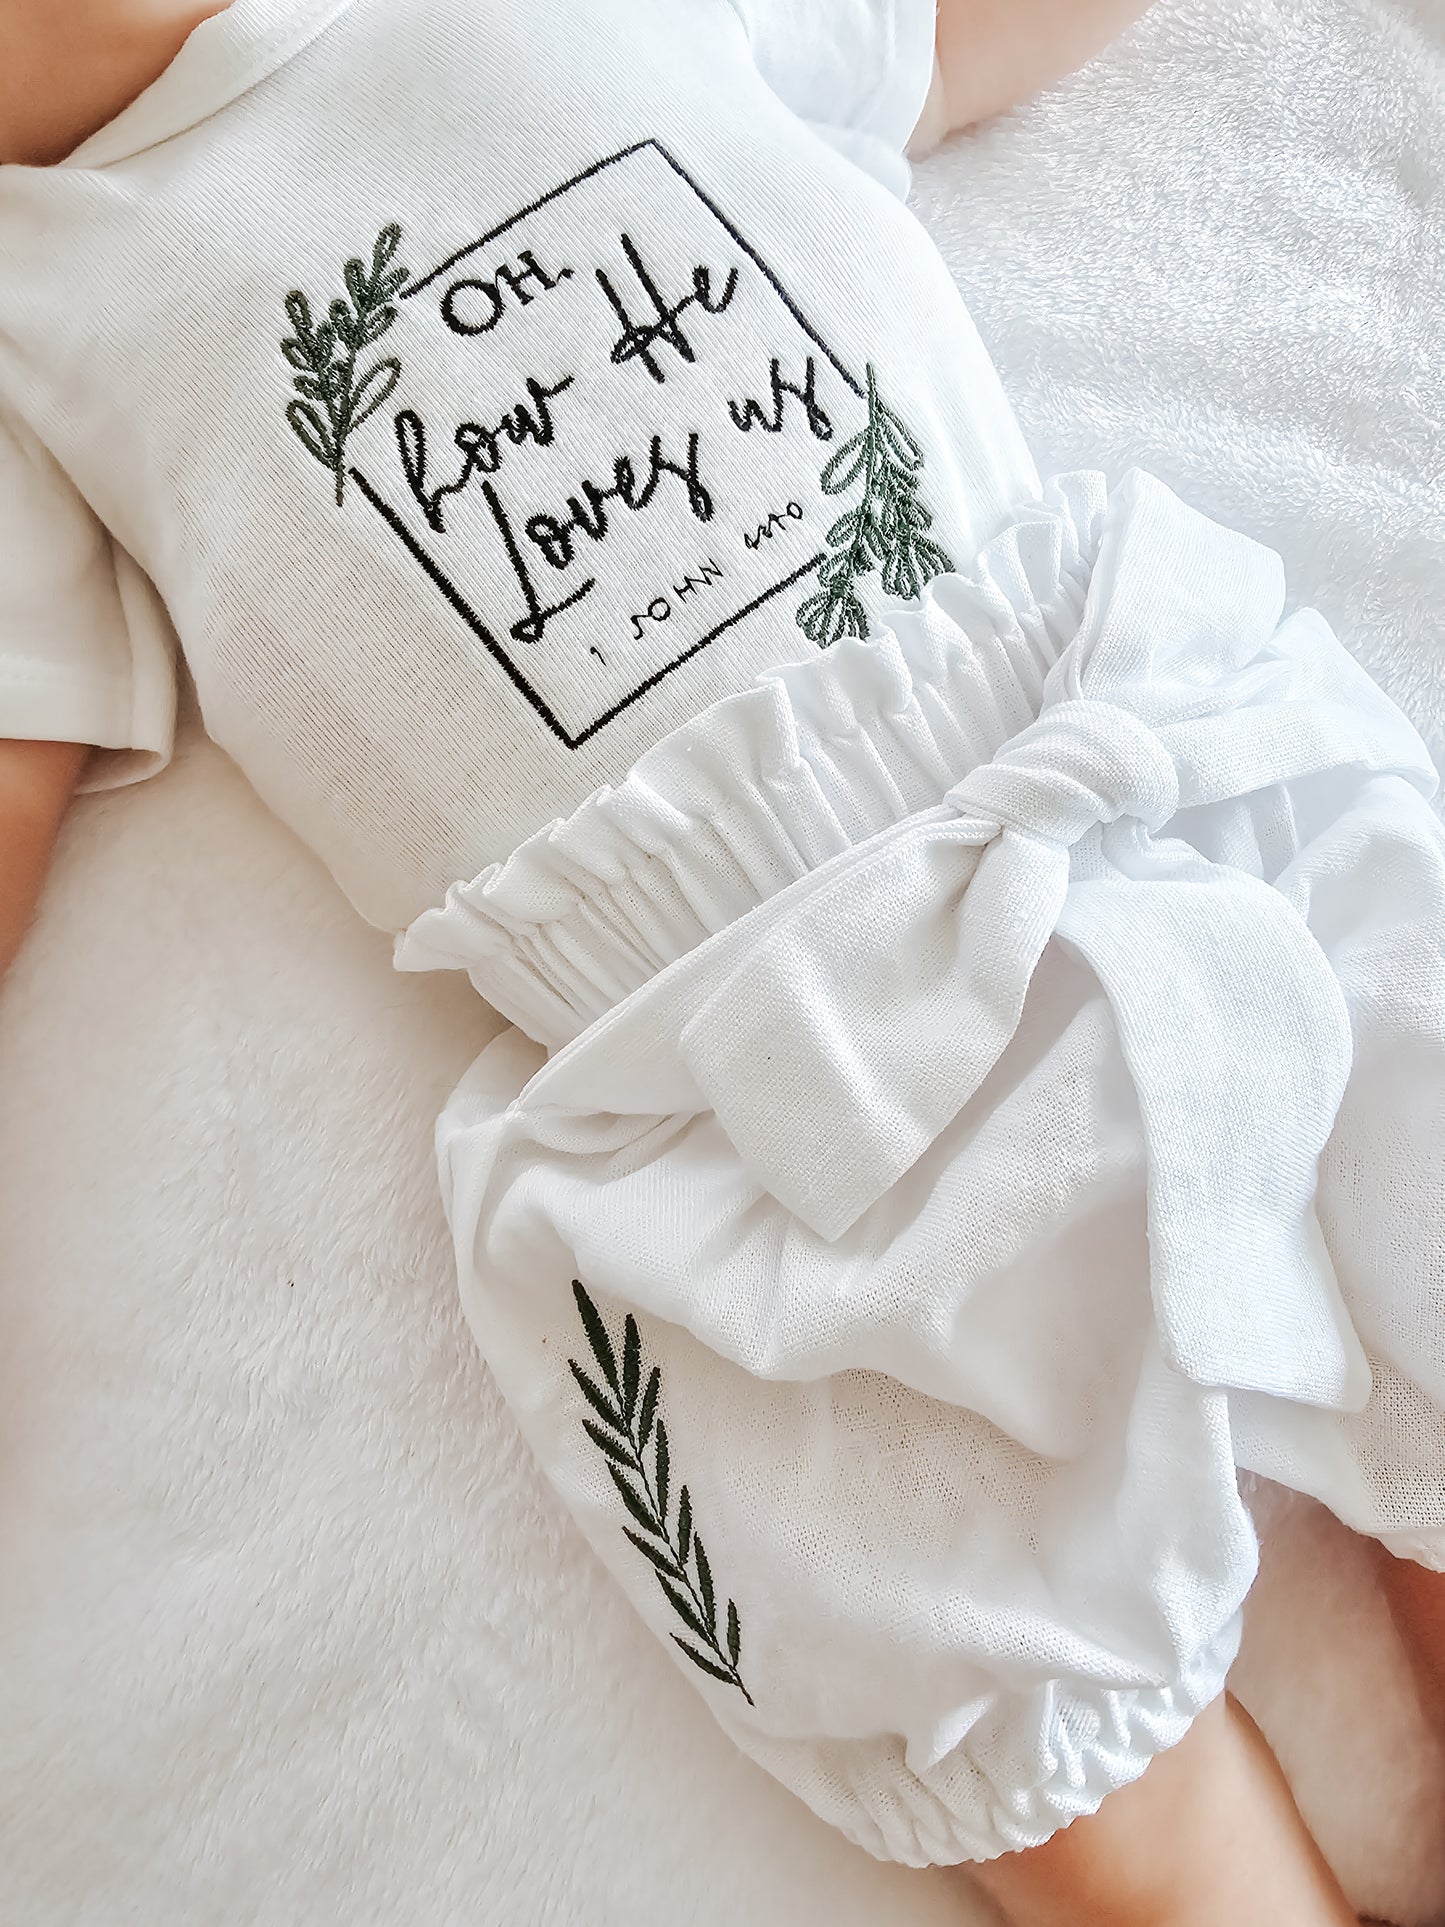 How He Loves us-Embroidered set